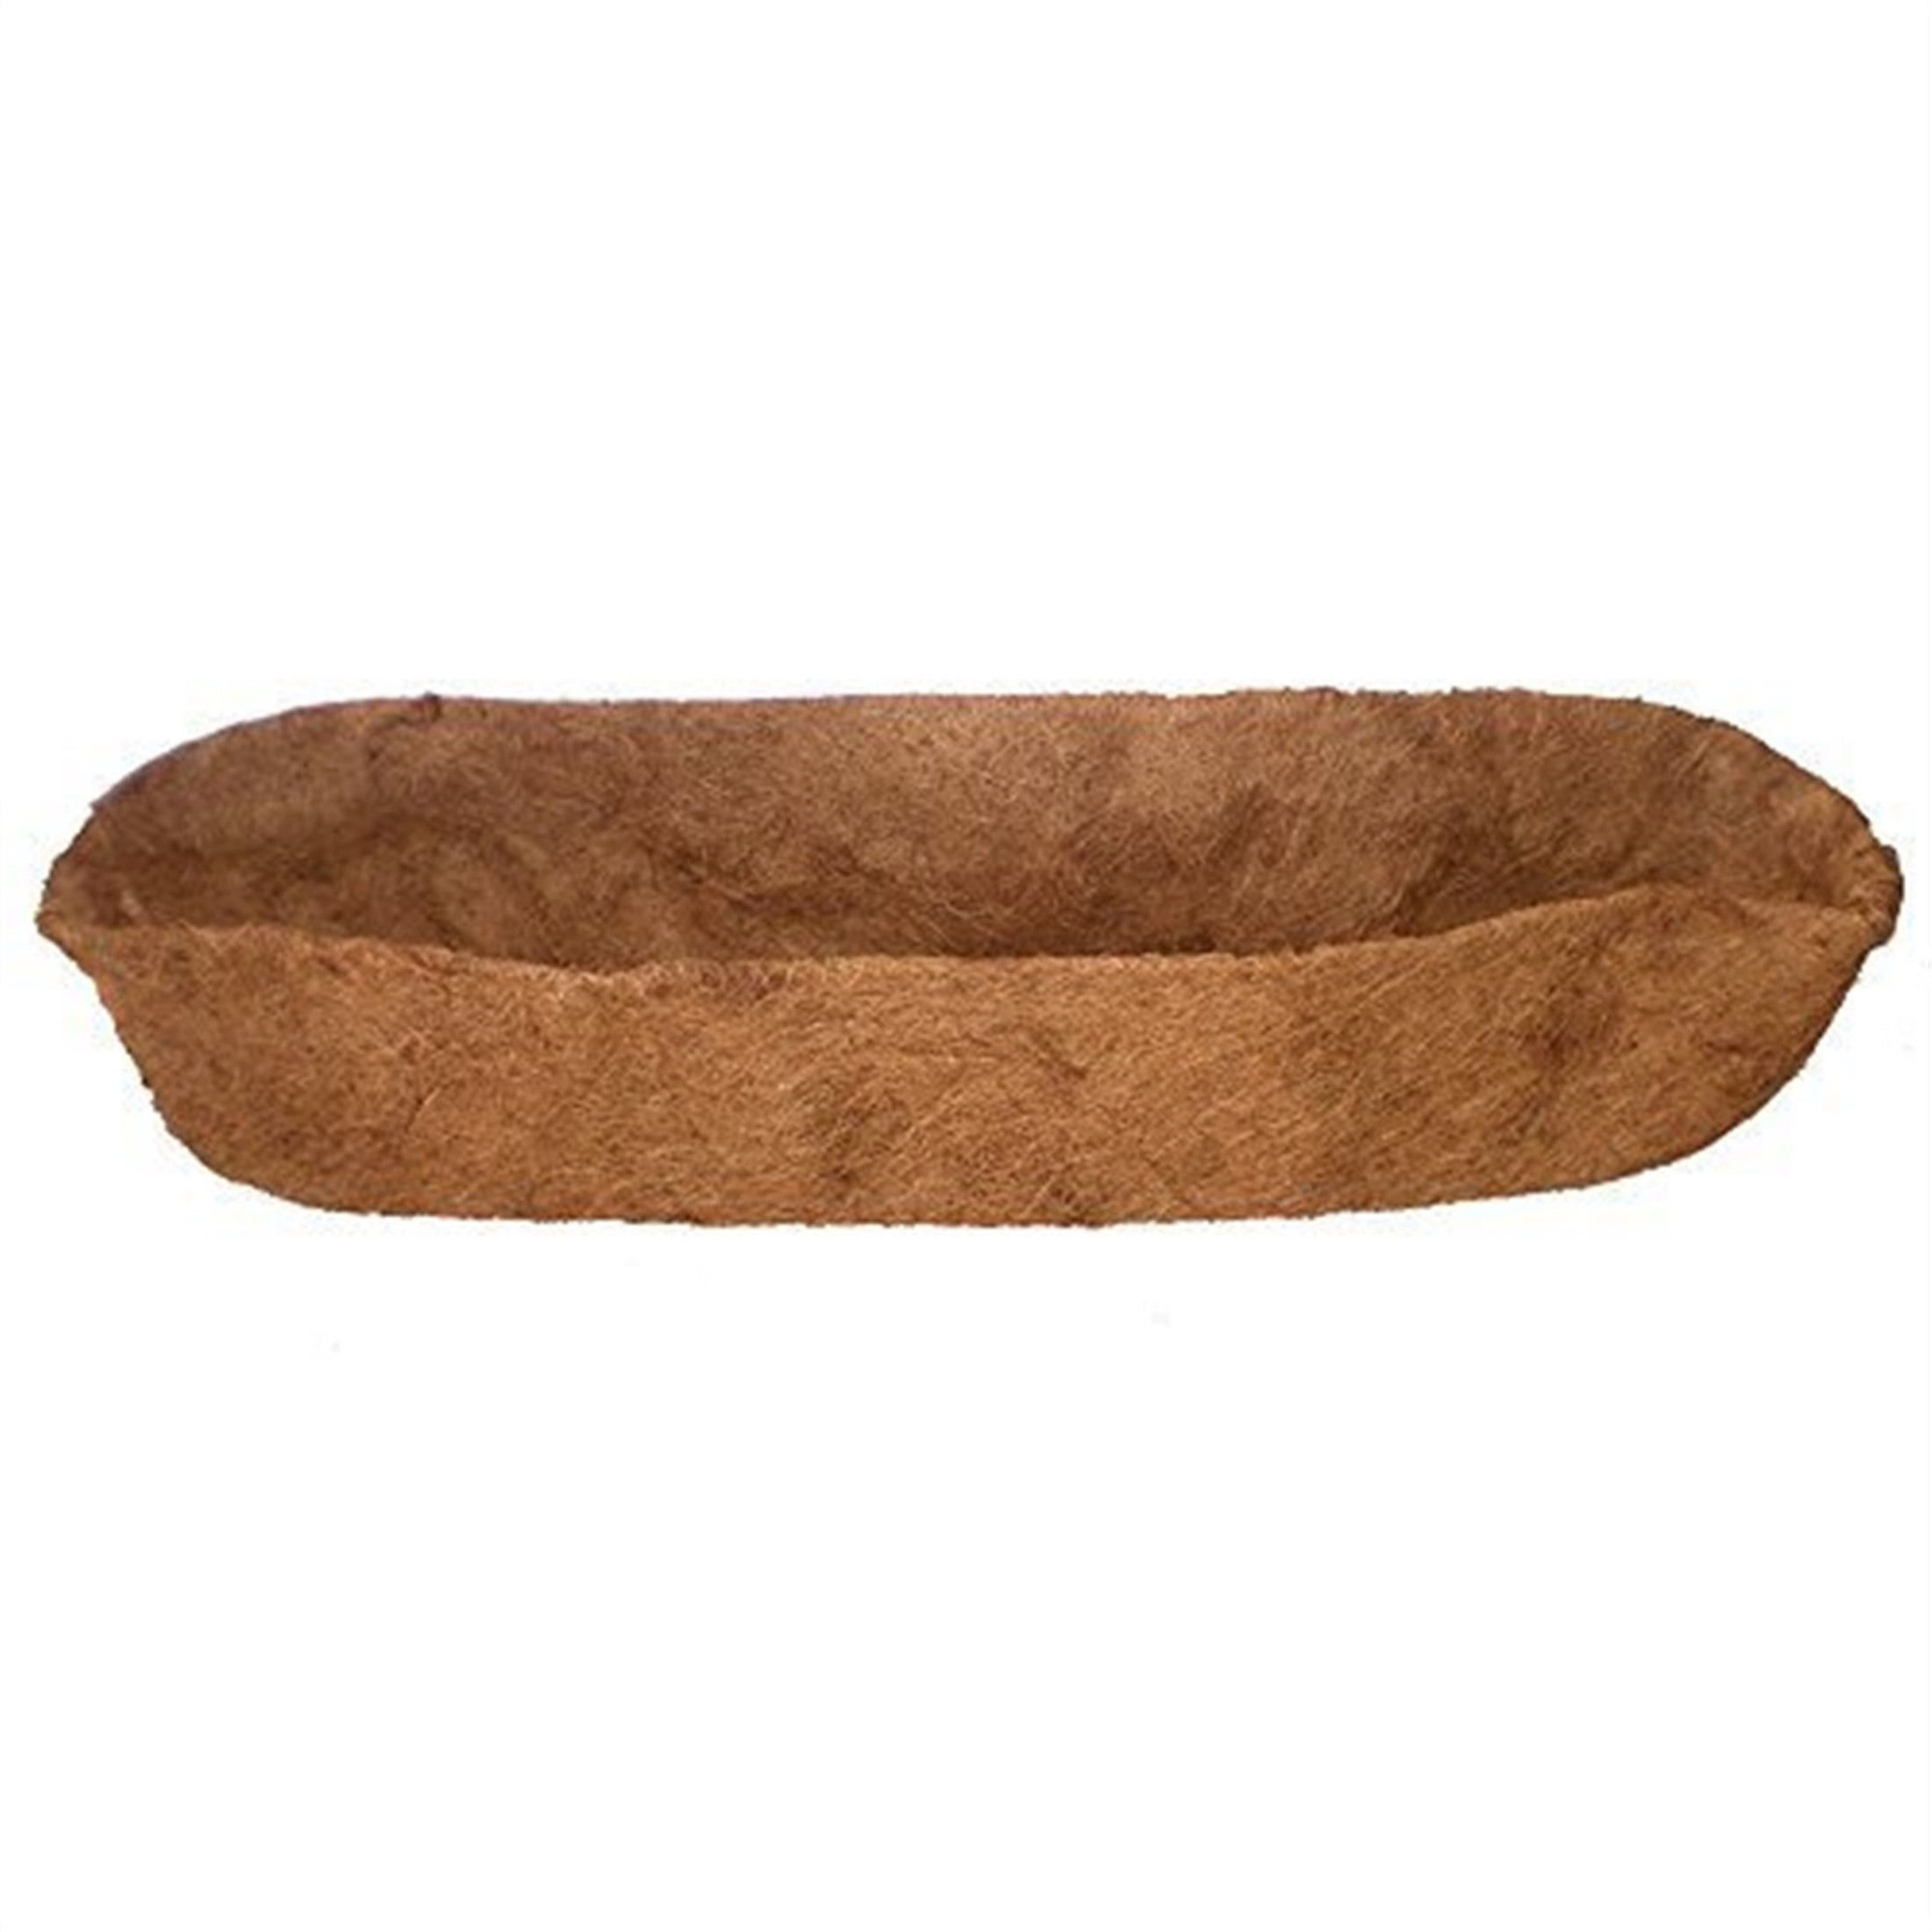 Grower Select Source Skill Coconut Arts Growers Select Forge Trough Shaped Coco Liner, 48"